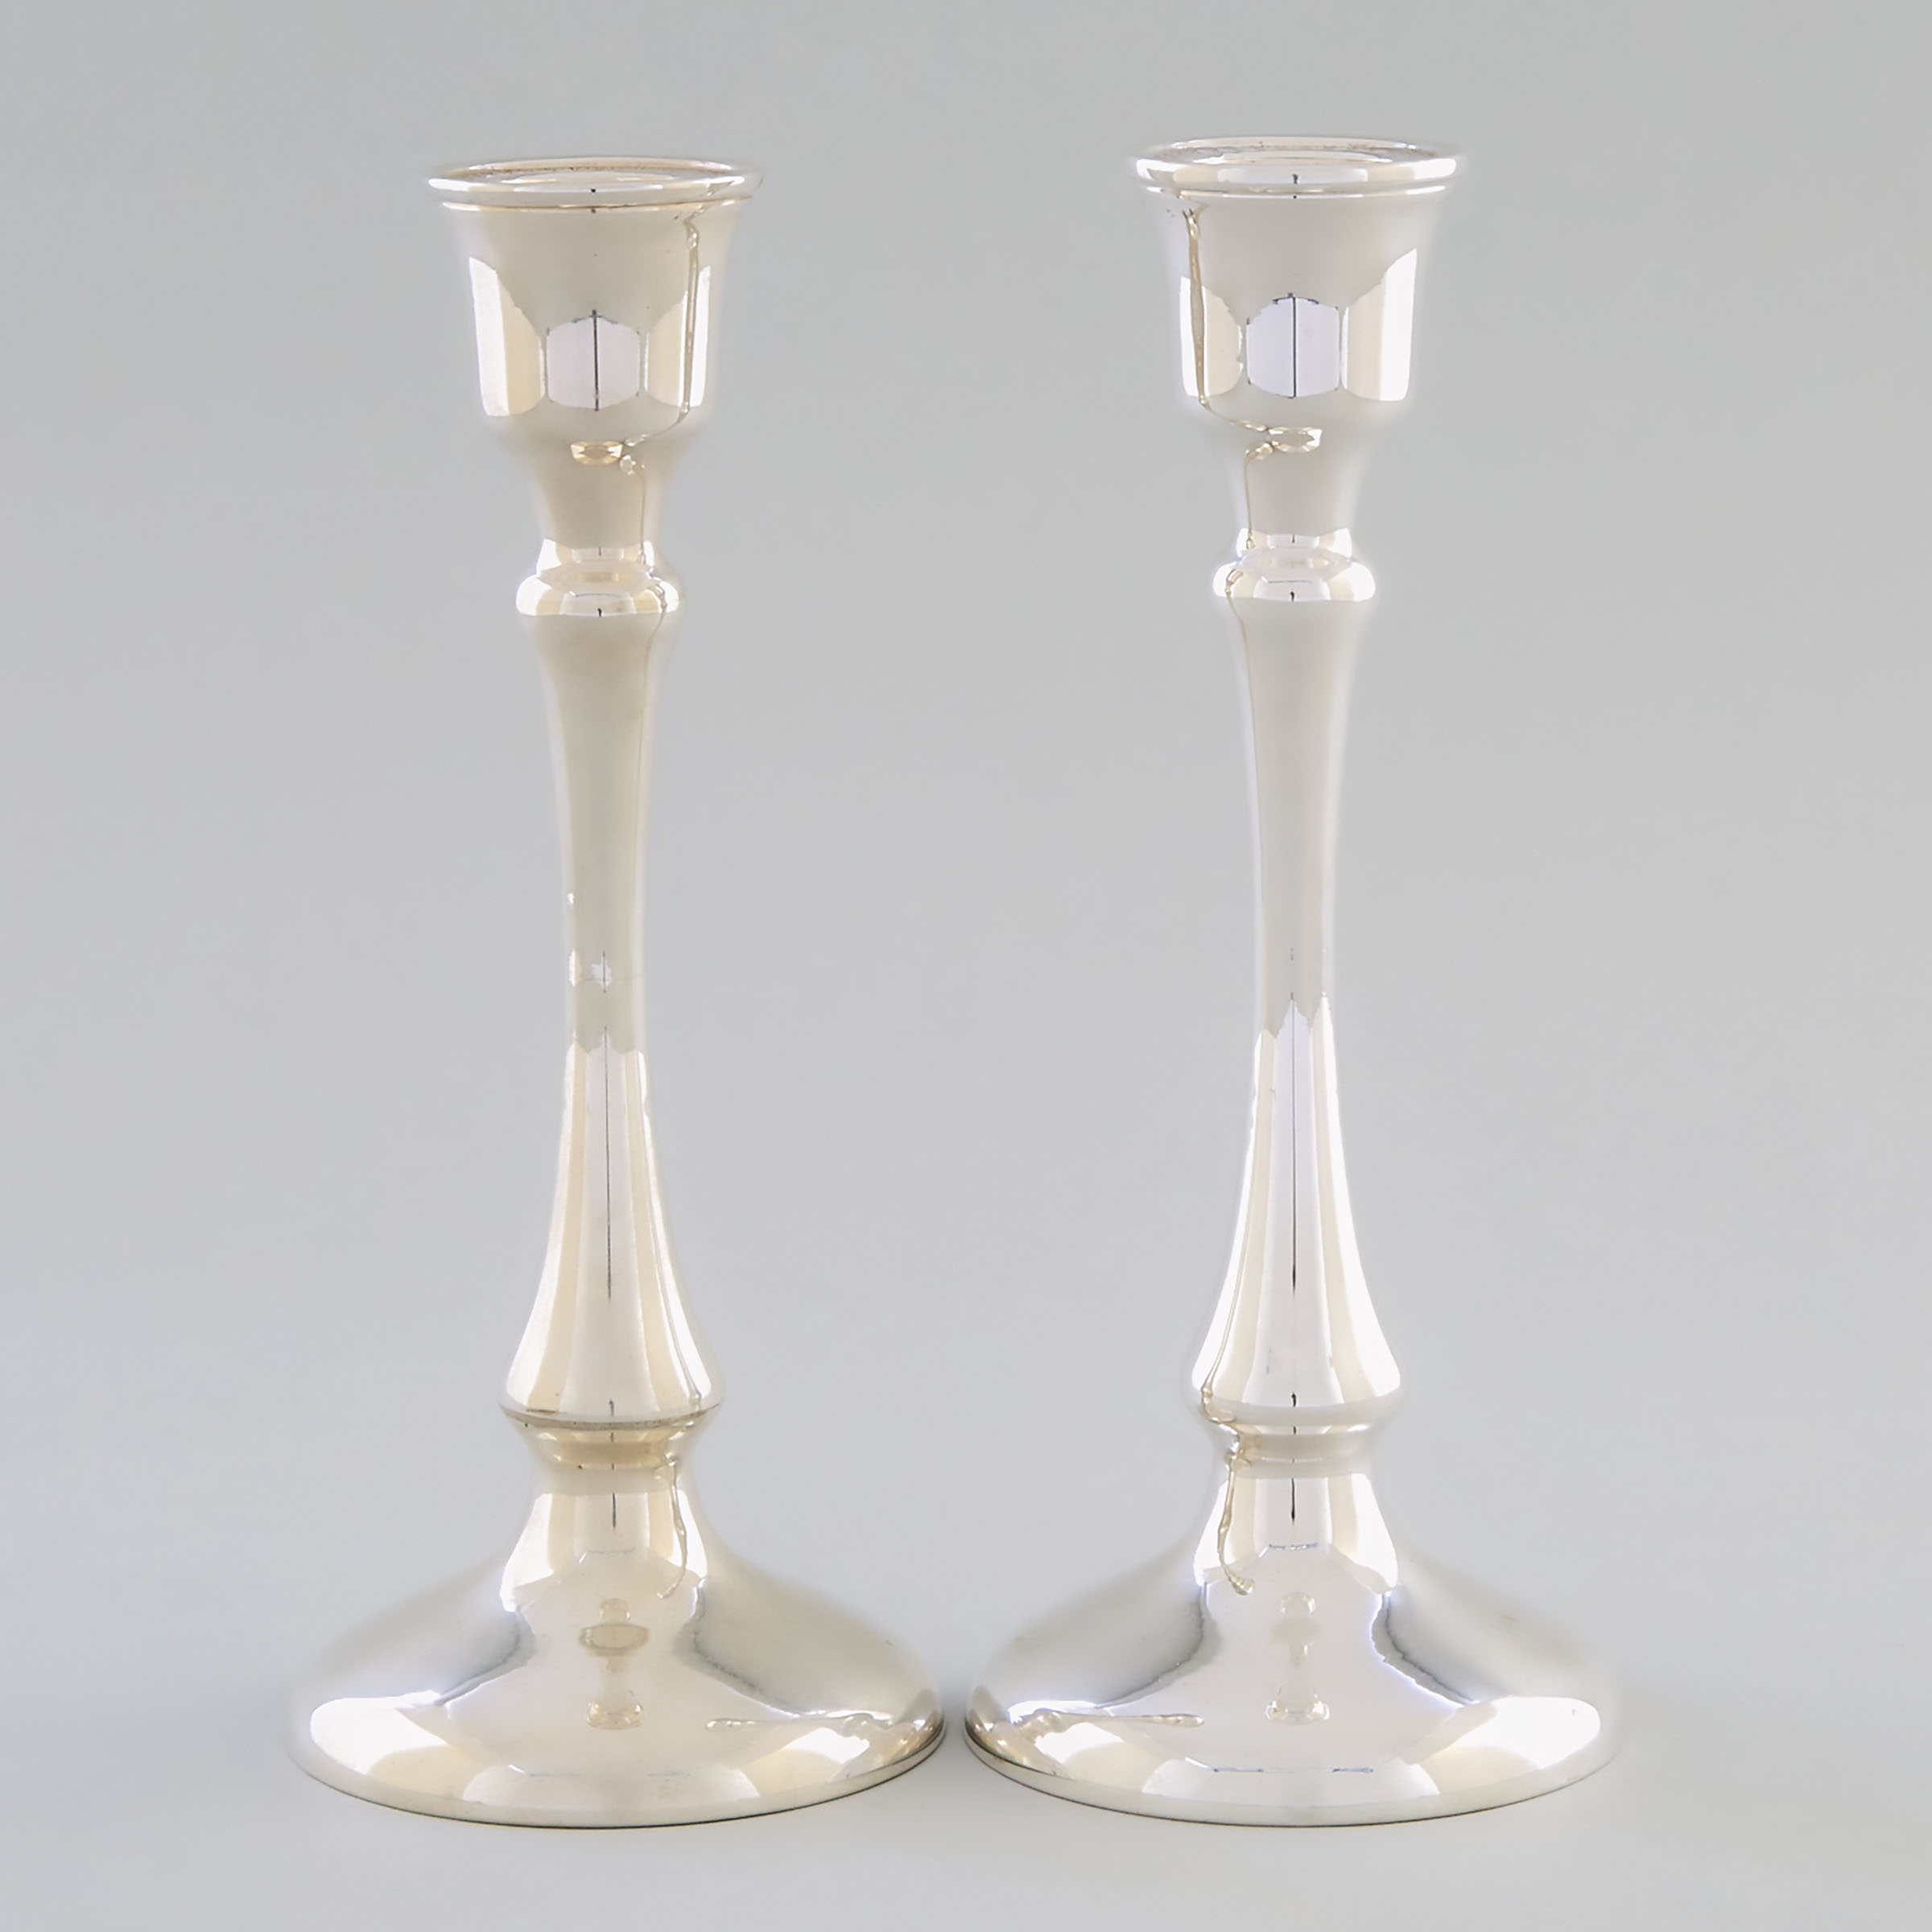 Pair of Continental Silver Table Candlesticks, 20th century